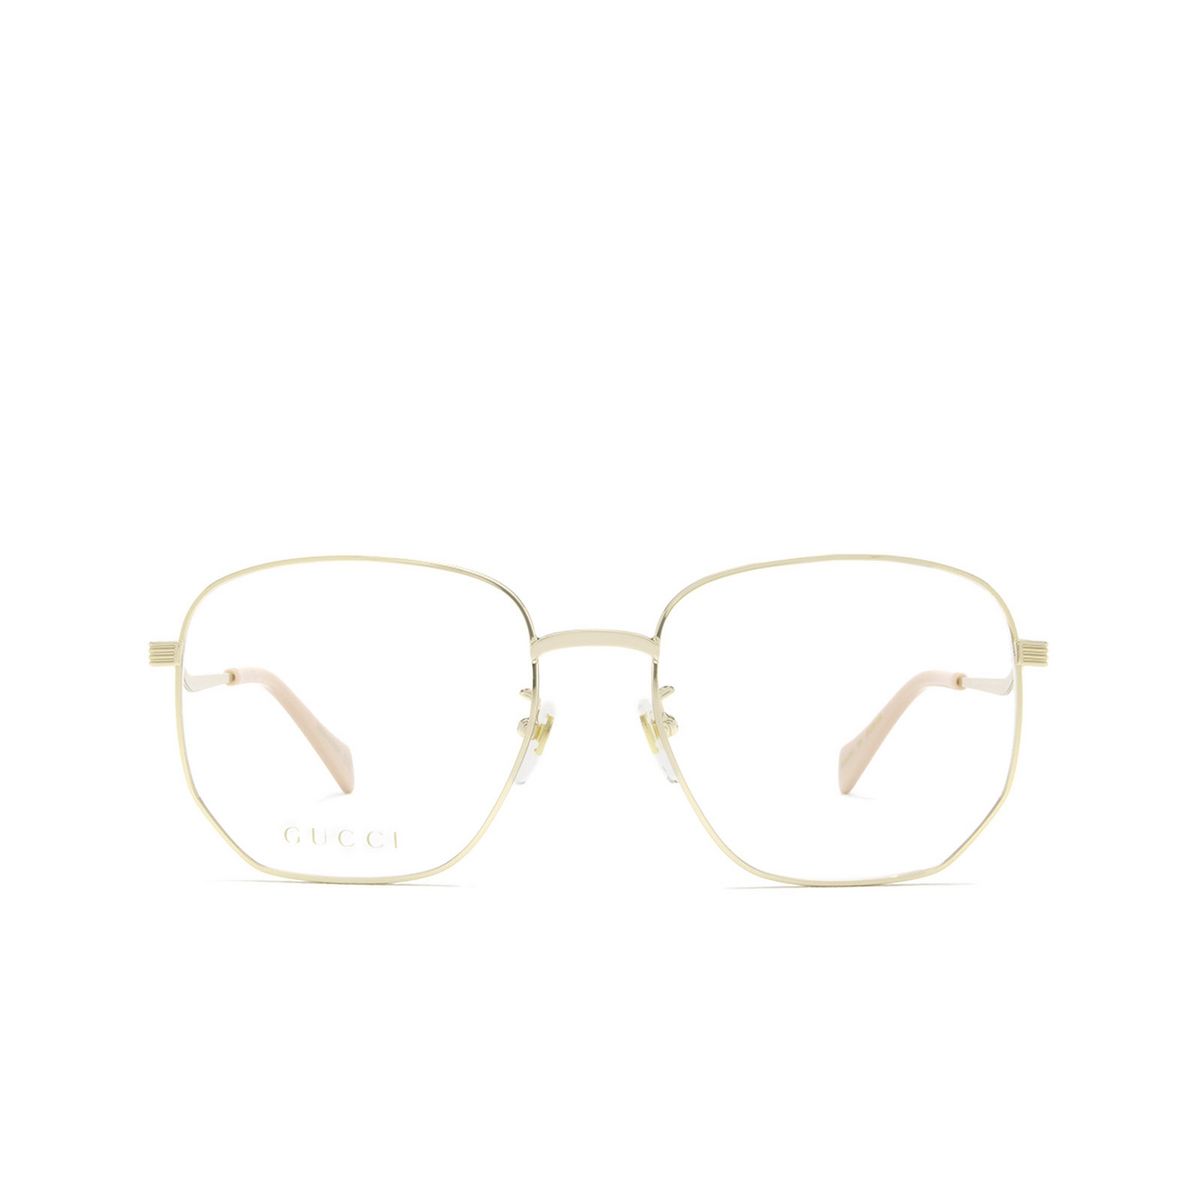 Gucci® Square Eyeglasses: GG0973O color Gold 001 - front view.